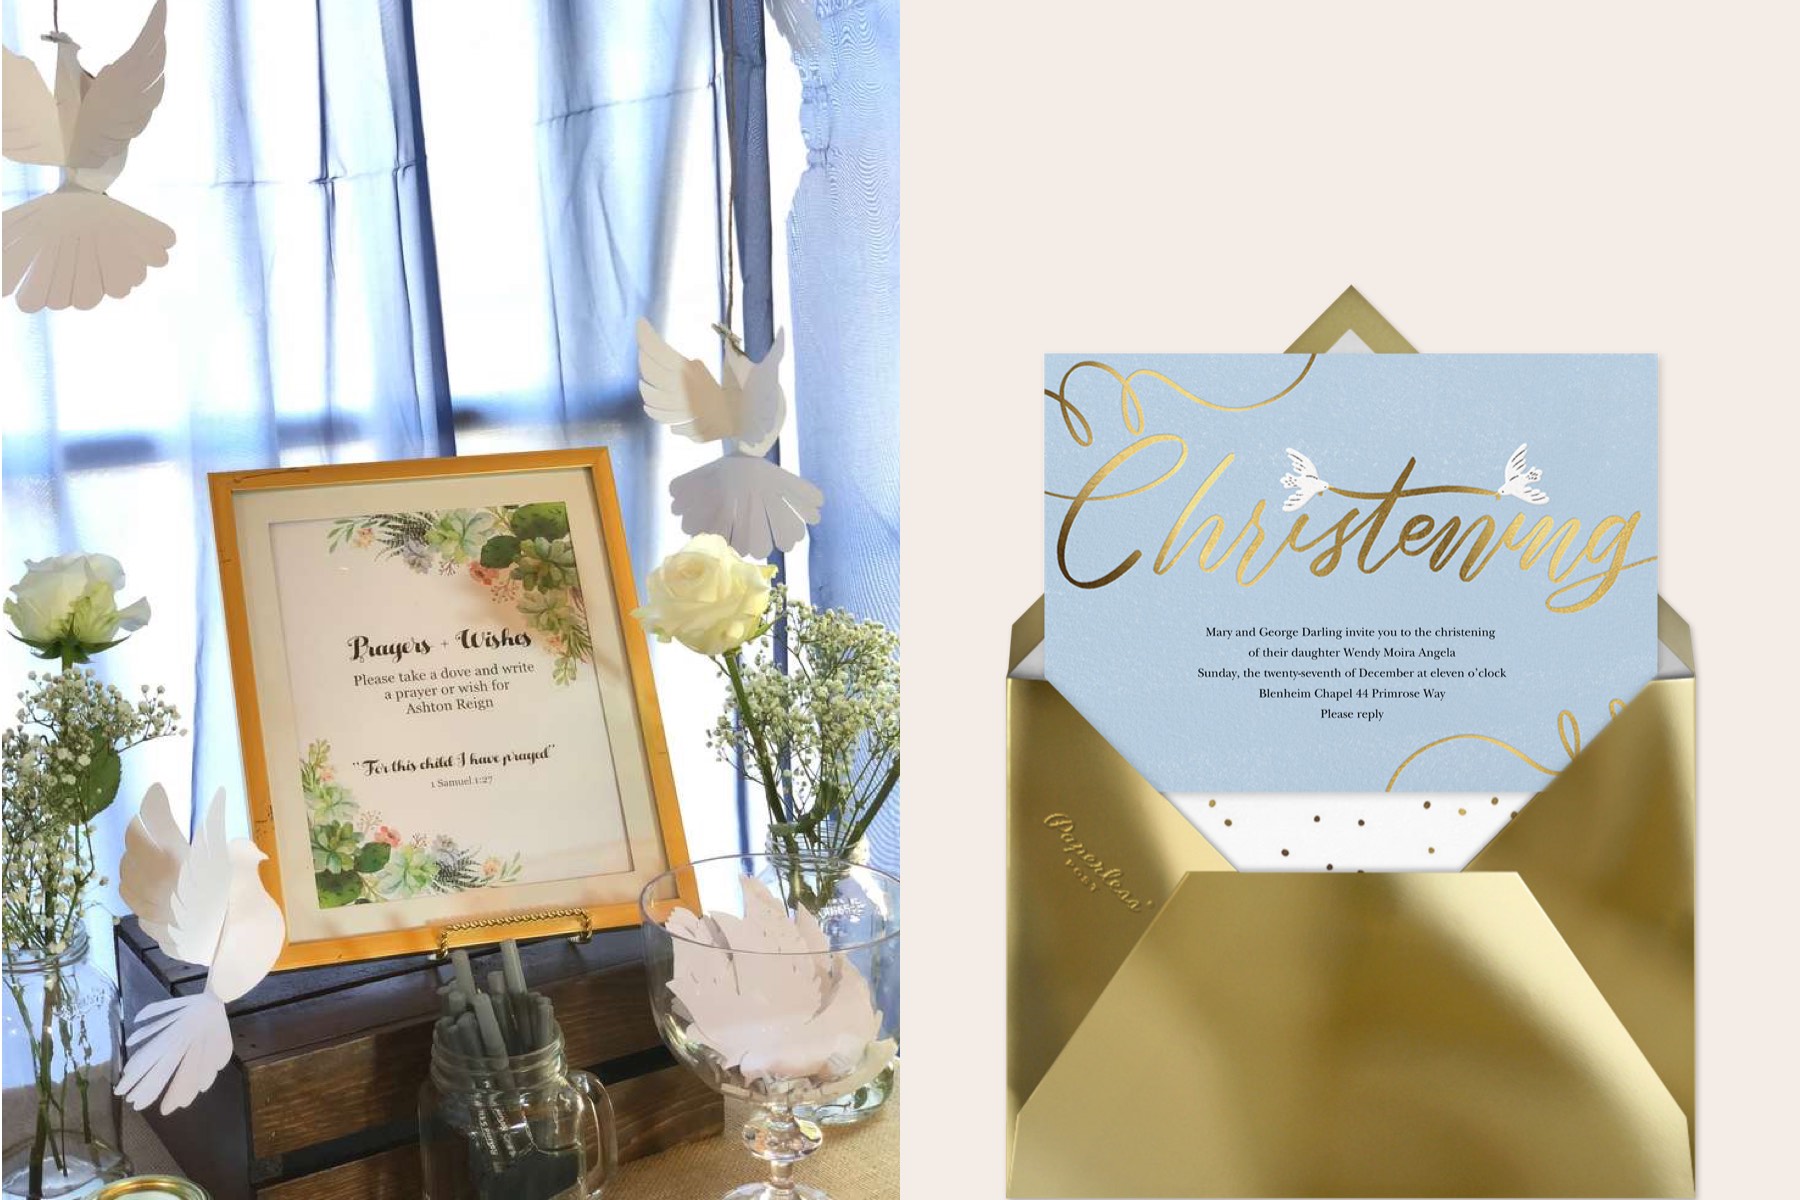 left: A framed image at a baptism party inviting guests to write prayers for the baby. Right: A card that reads “Christening” in script with illustrated doves. 